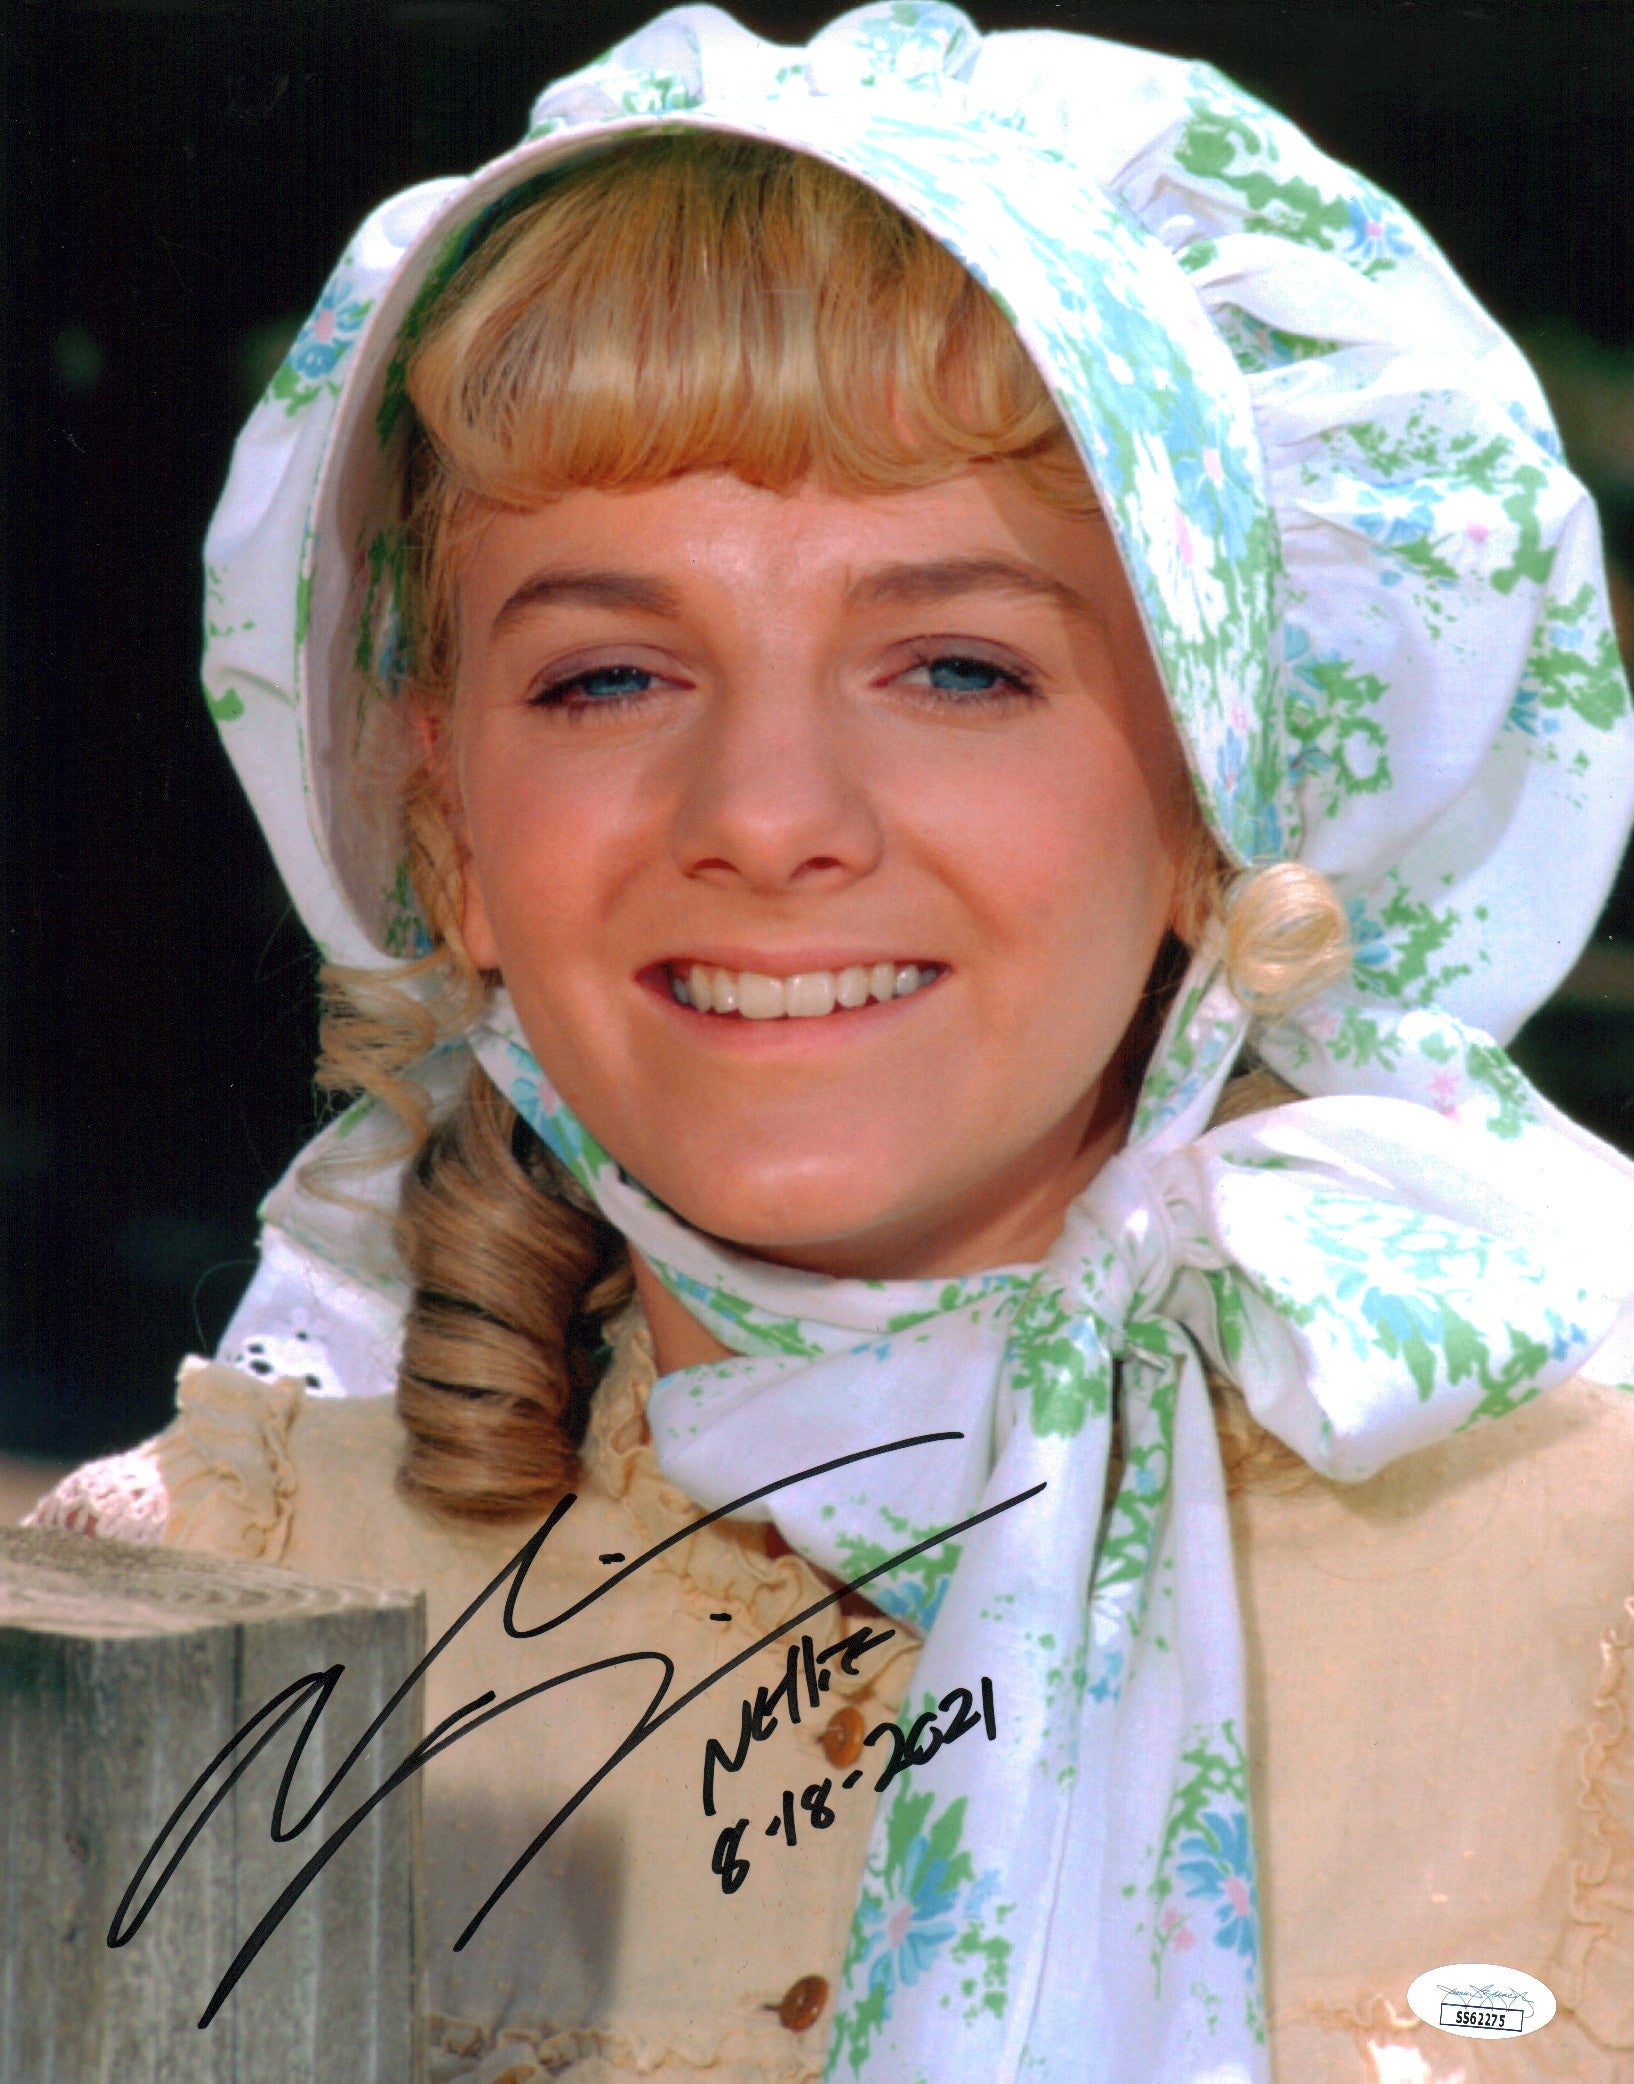 Alison Arngrim Little House on the Prairie 11x14 Photo Poster Signed JSA Certified Autograph